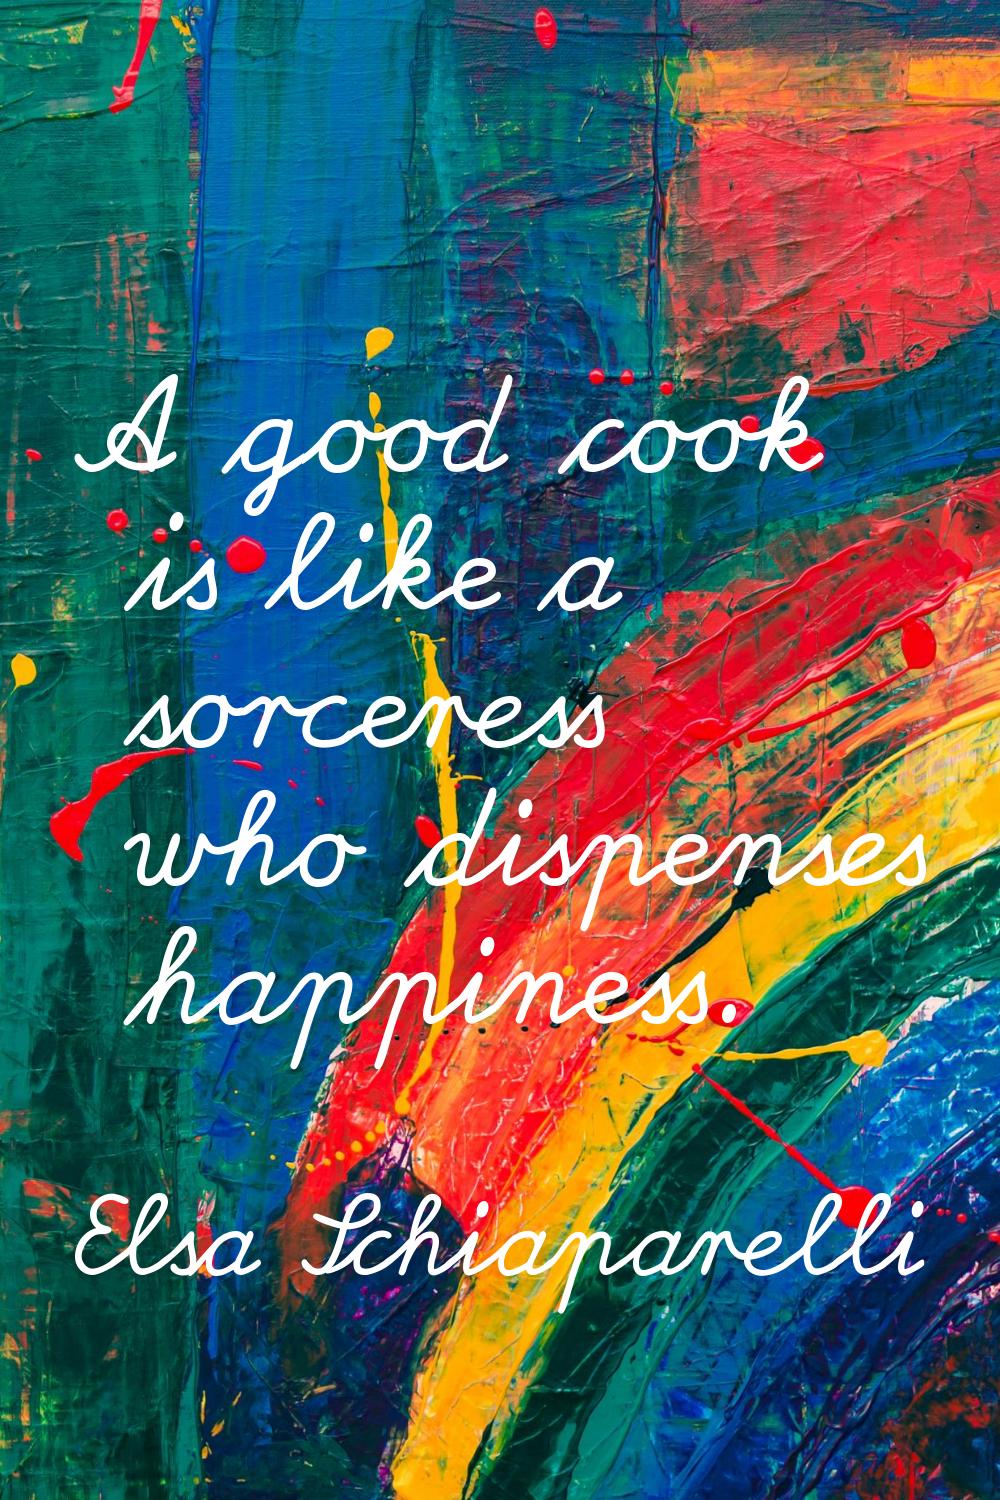 A good cook is like a sorceress who dispenses happiness.